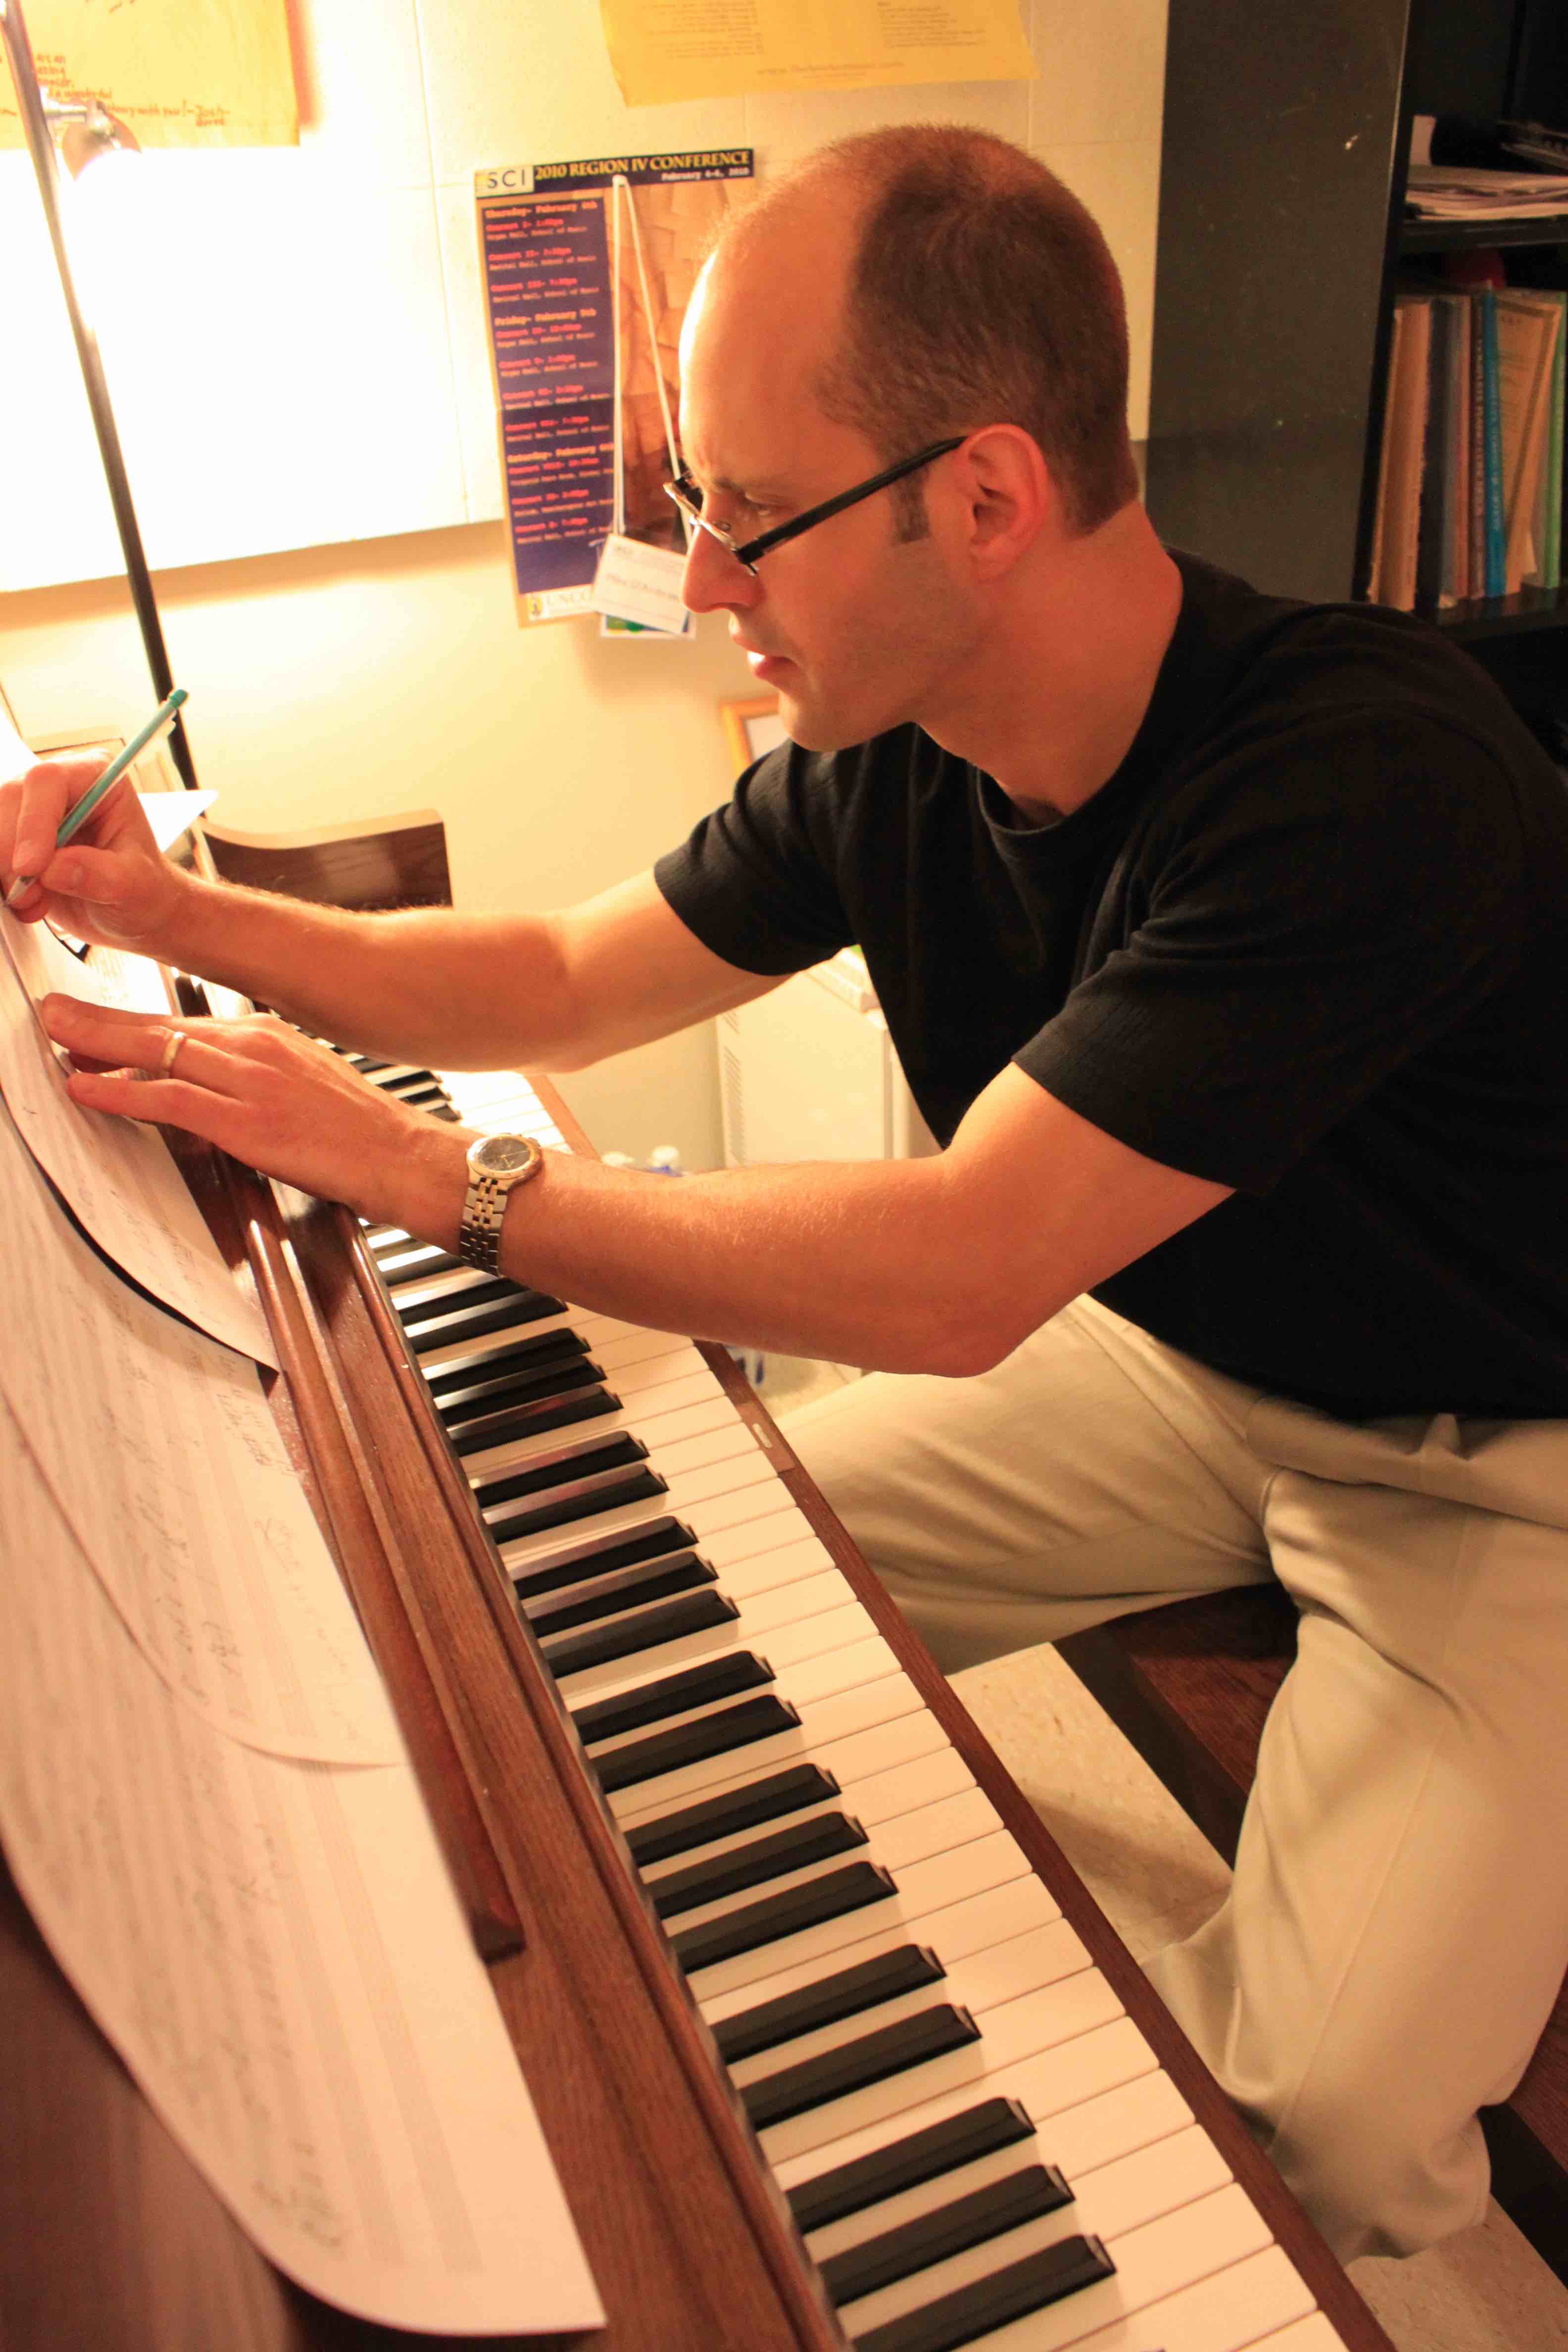 Mike D’Ambrosio, a composition professor in the department of music at Ӱֱ State.